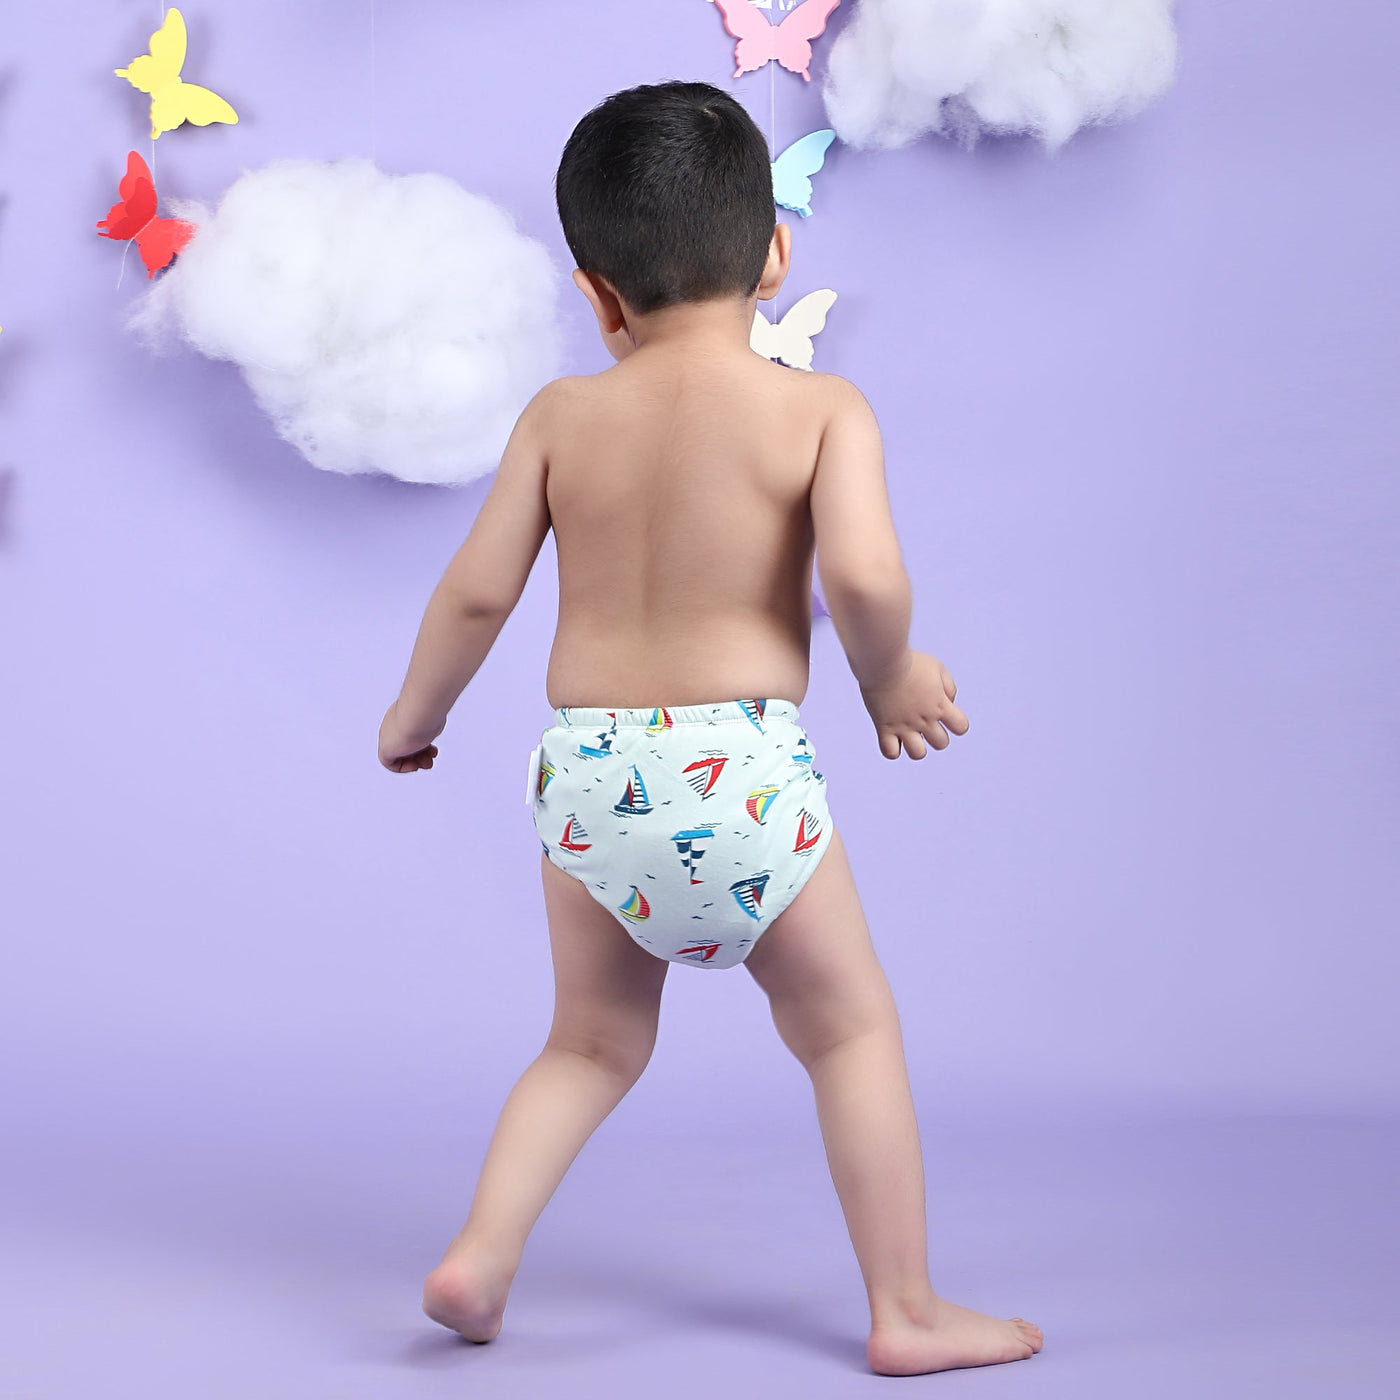 Padded Underwear for Growing Babies/Toddlers (Pack of 3)